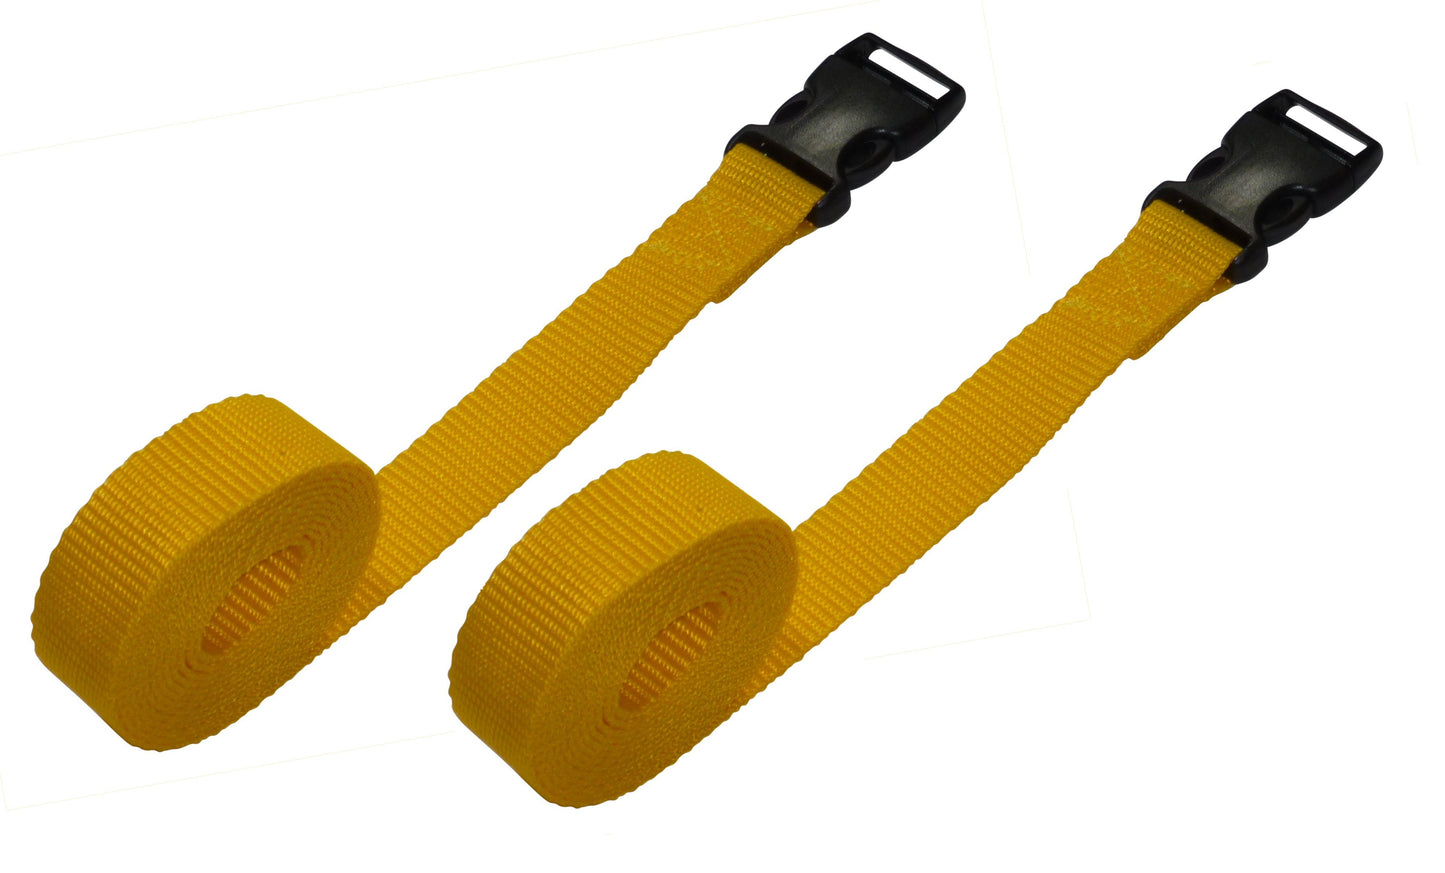 Benristraps 25mm Webbing Strap with Quick Release Buckle (Pair) in yellow